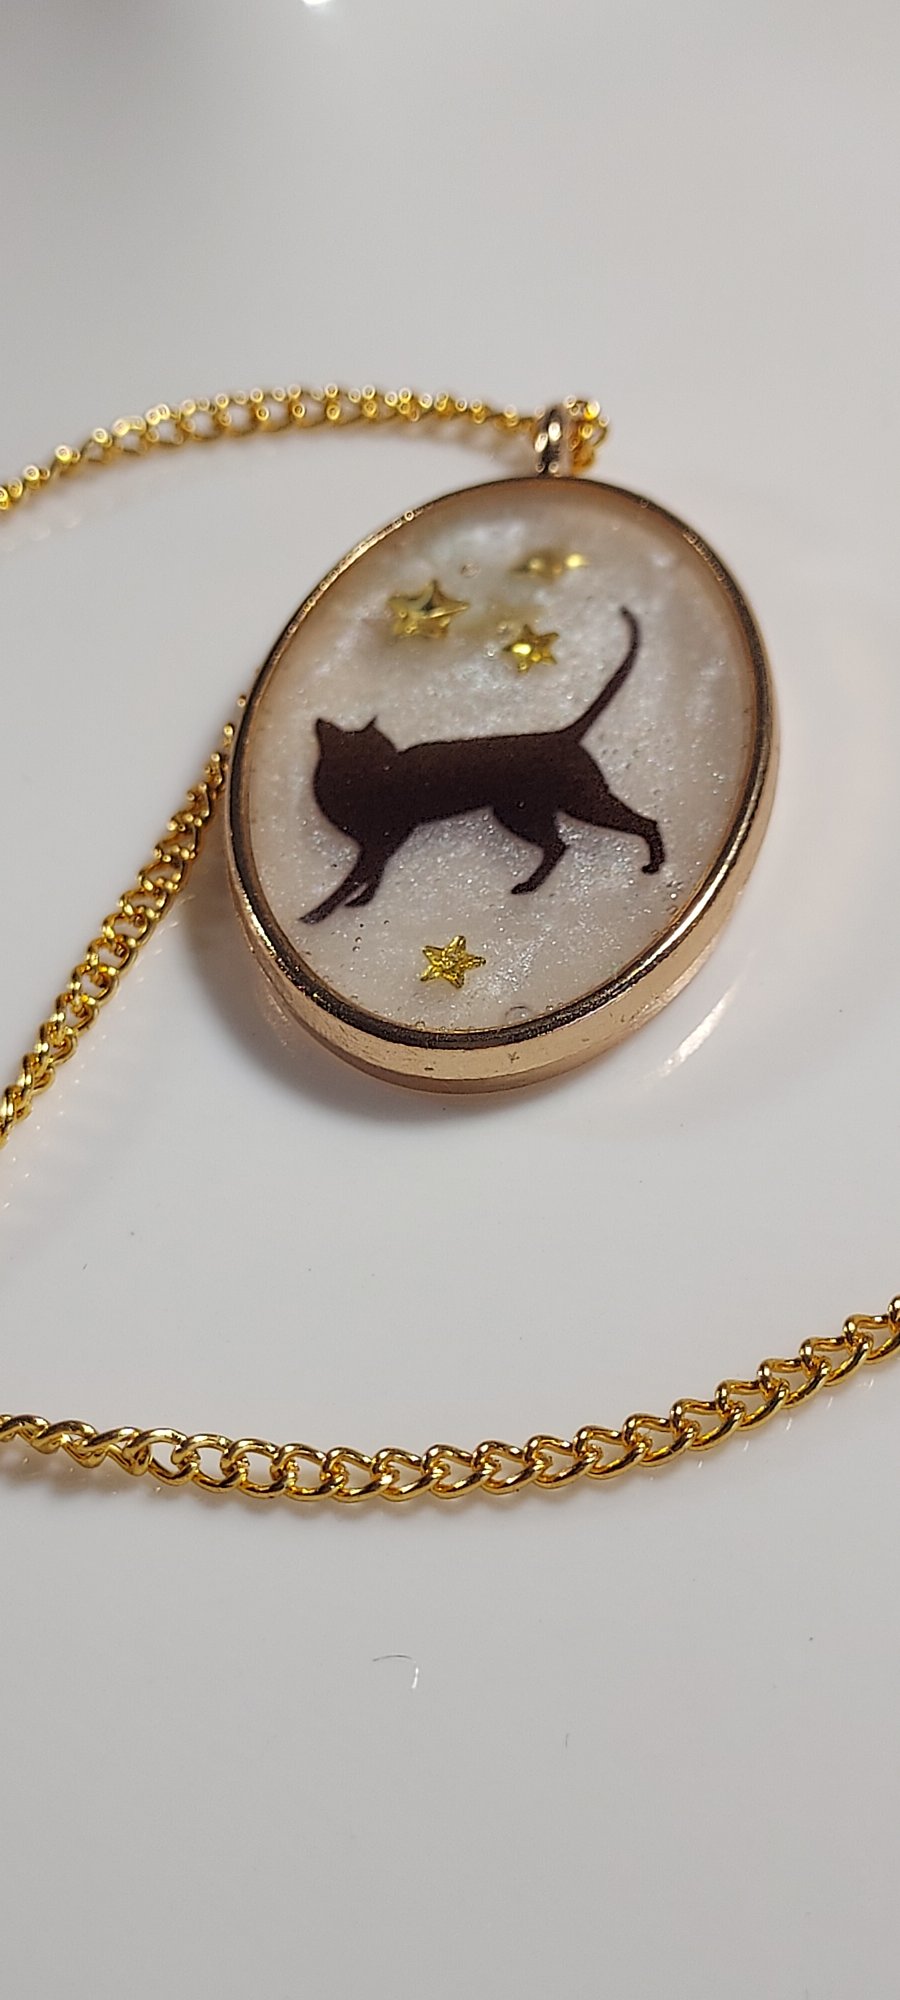 Oval resin pendant necklace with black cat and stars